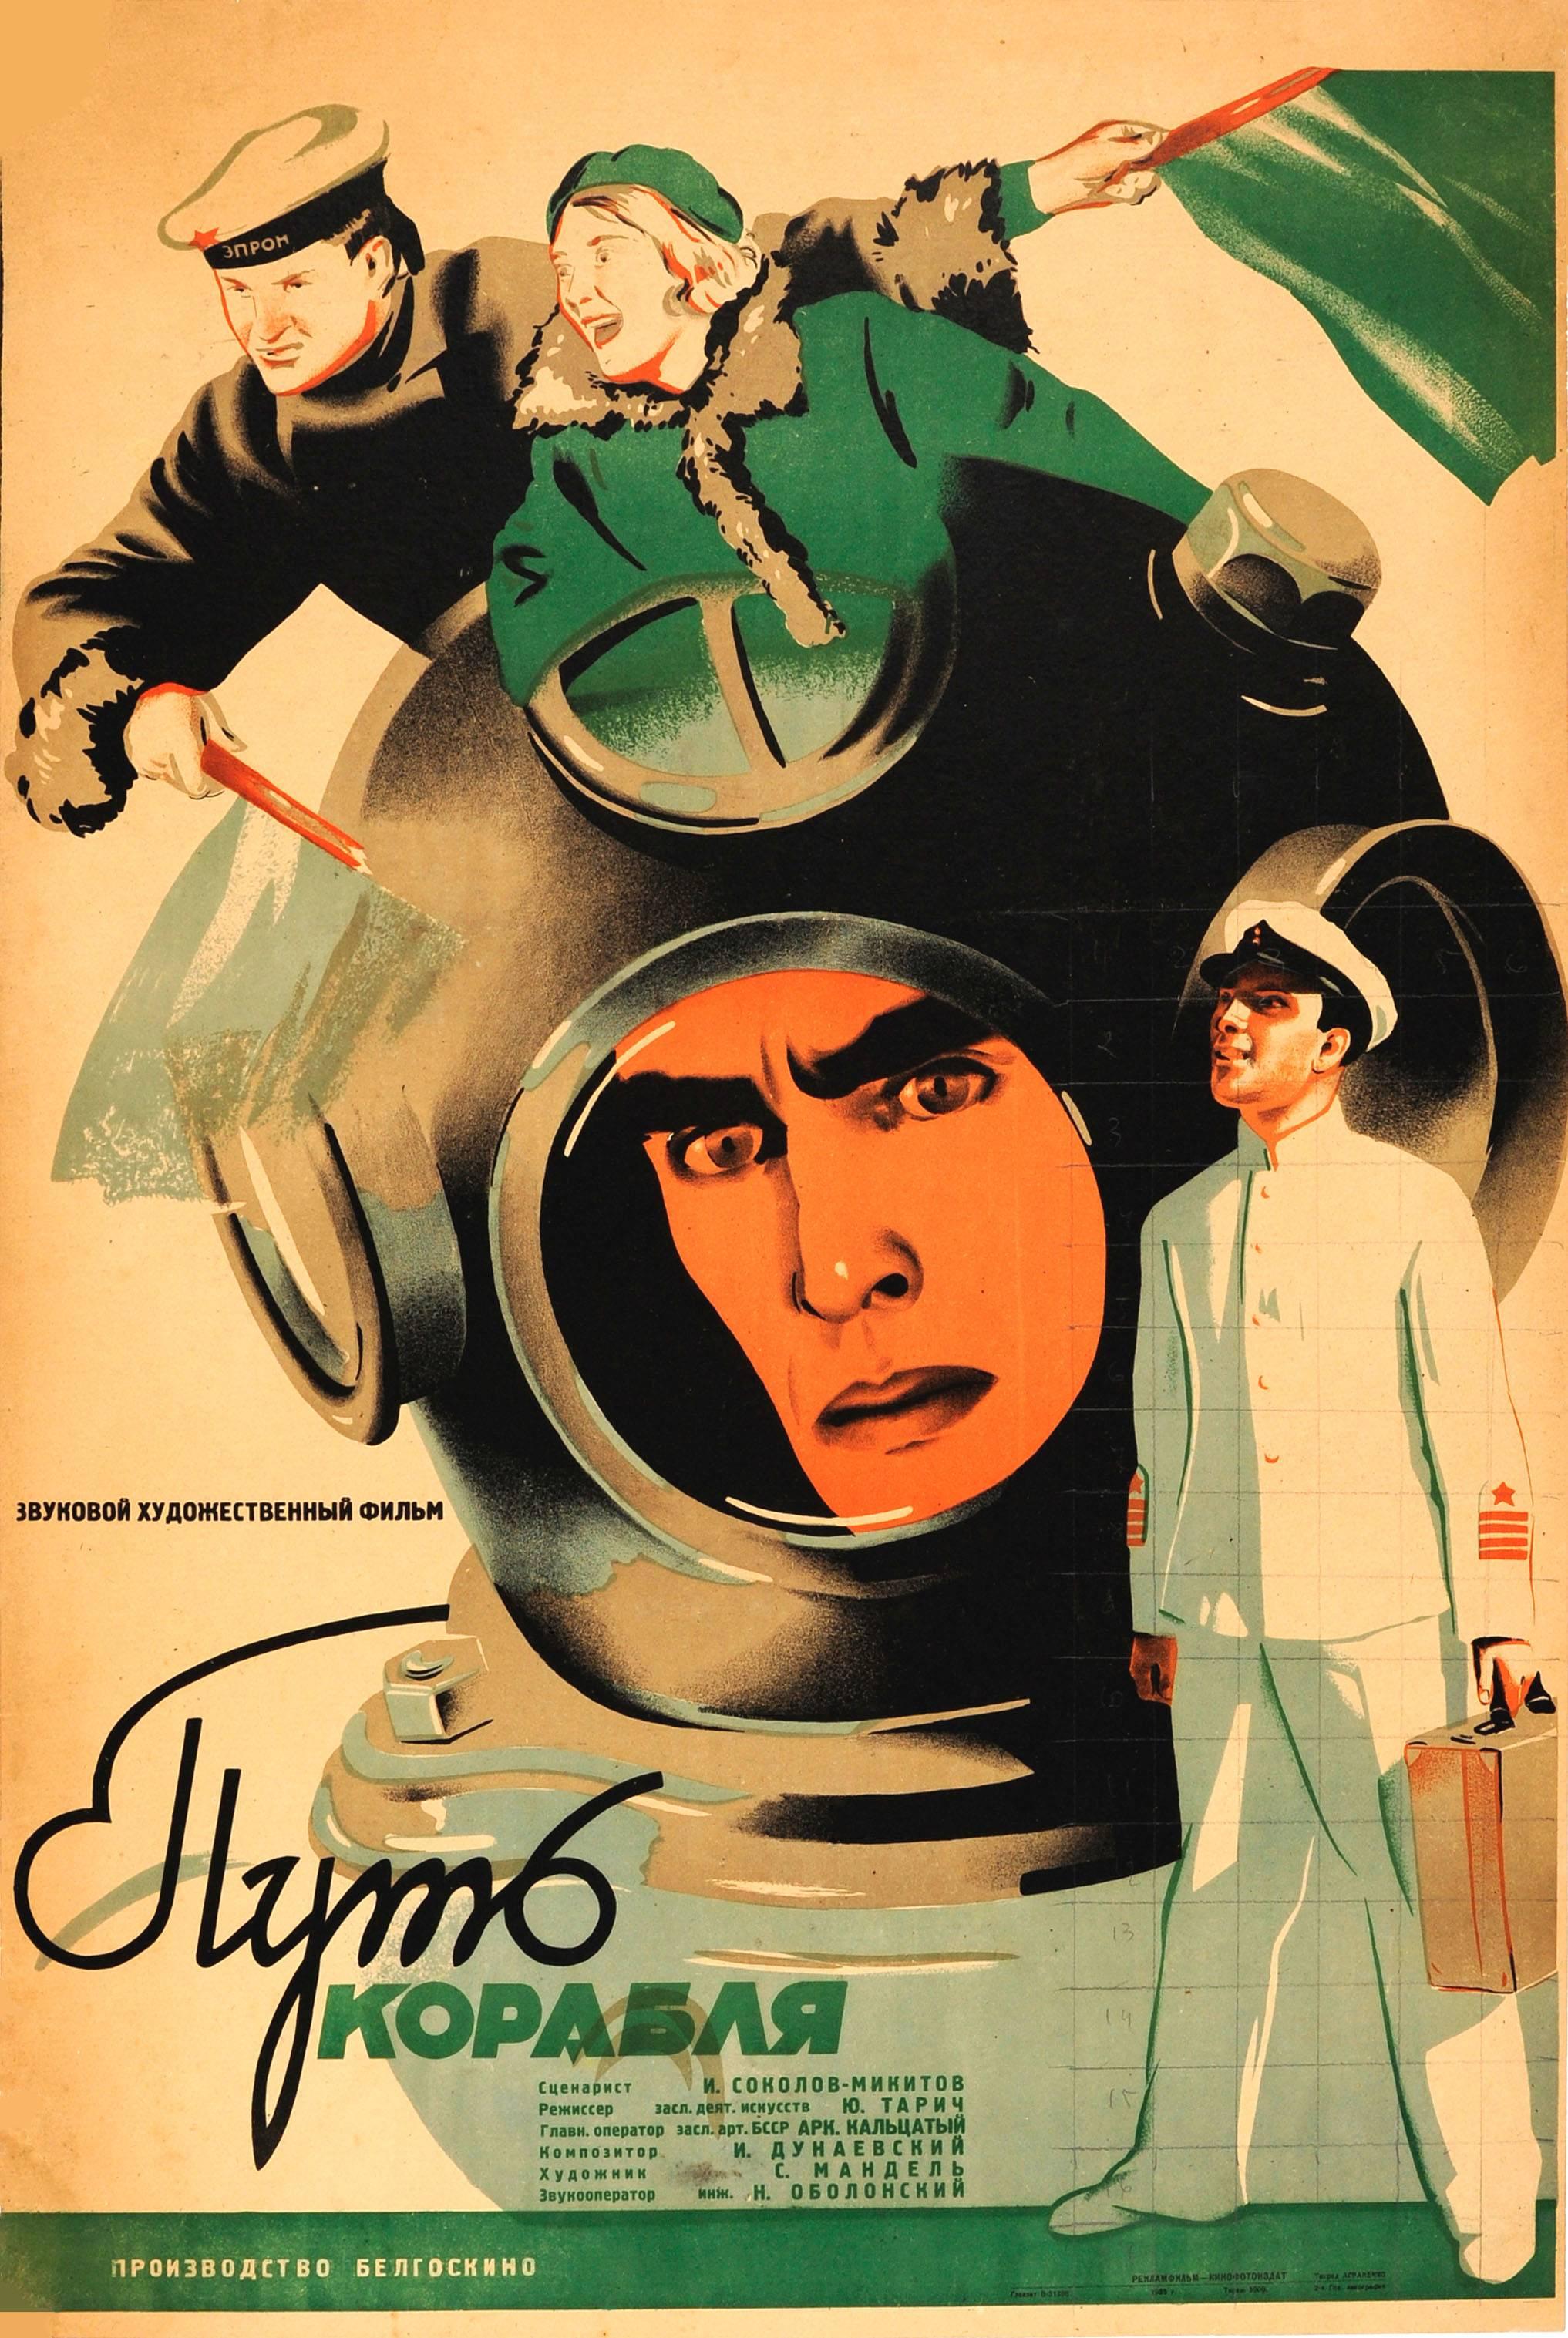 Unknown Print - Original Vintage Soviet Movie Poster For A Scuba Rescue Film - Course Of A Ship